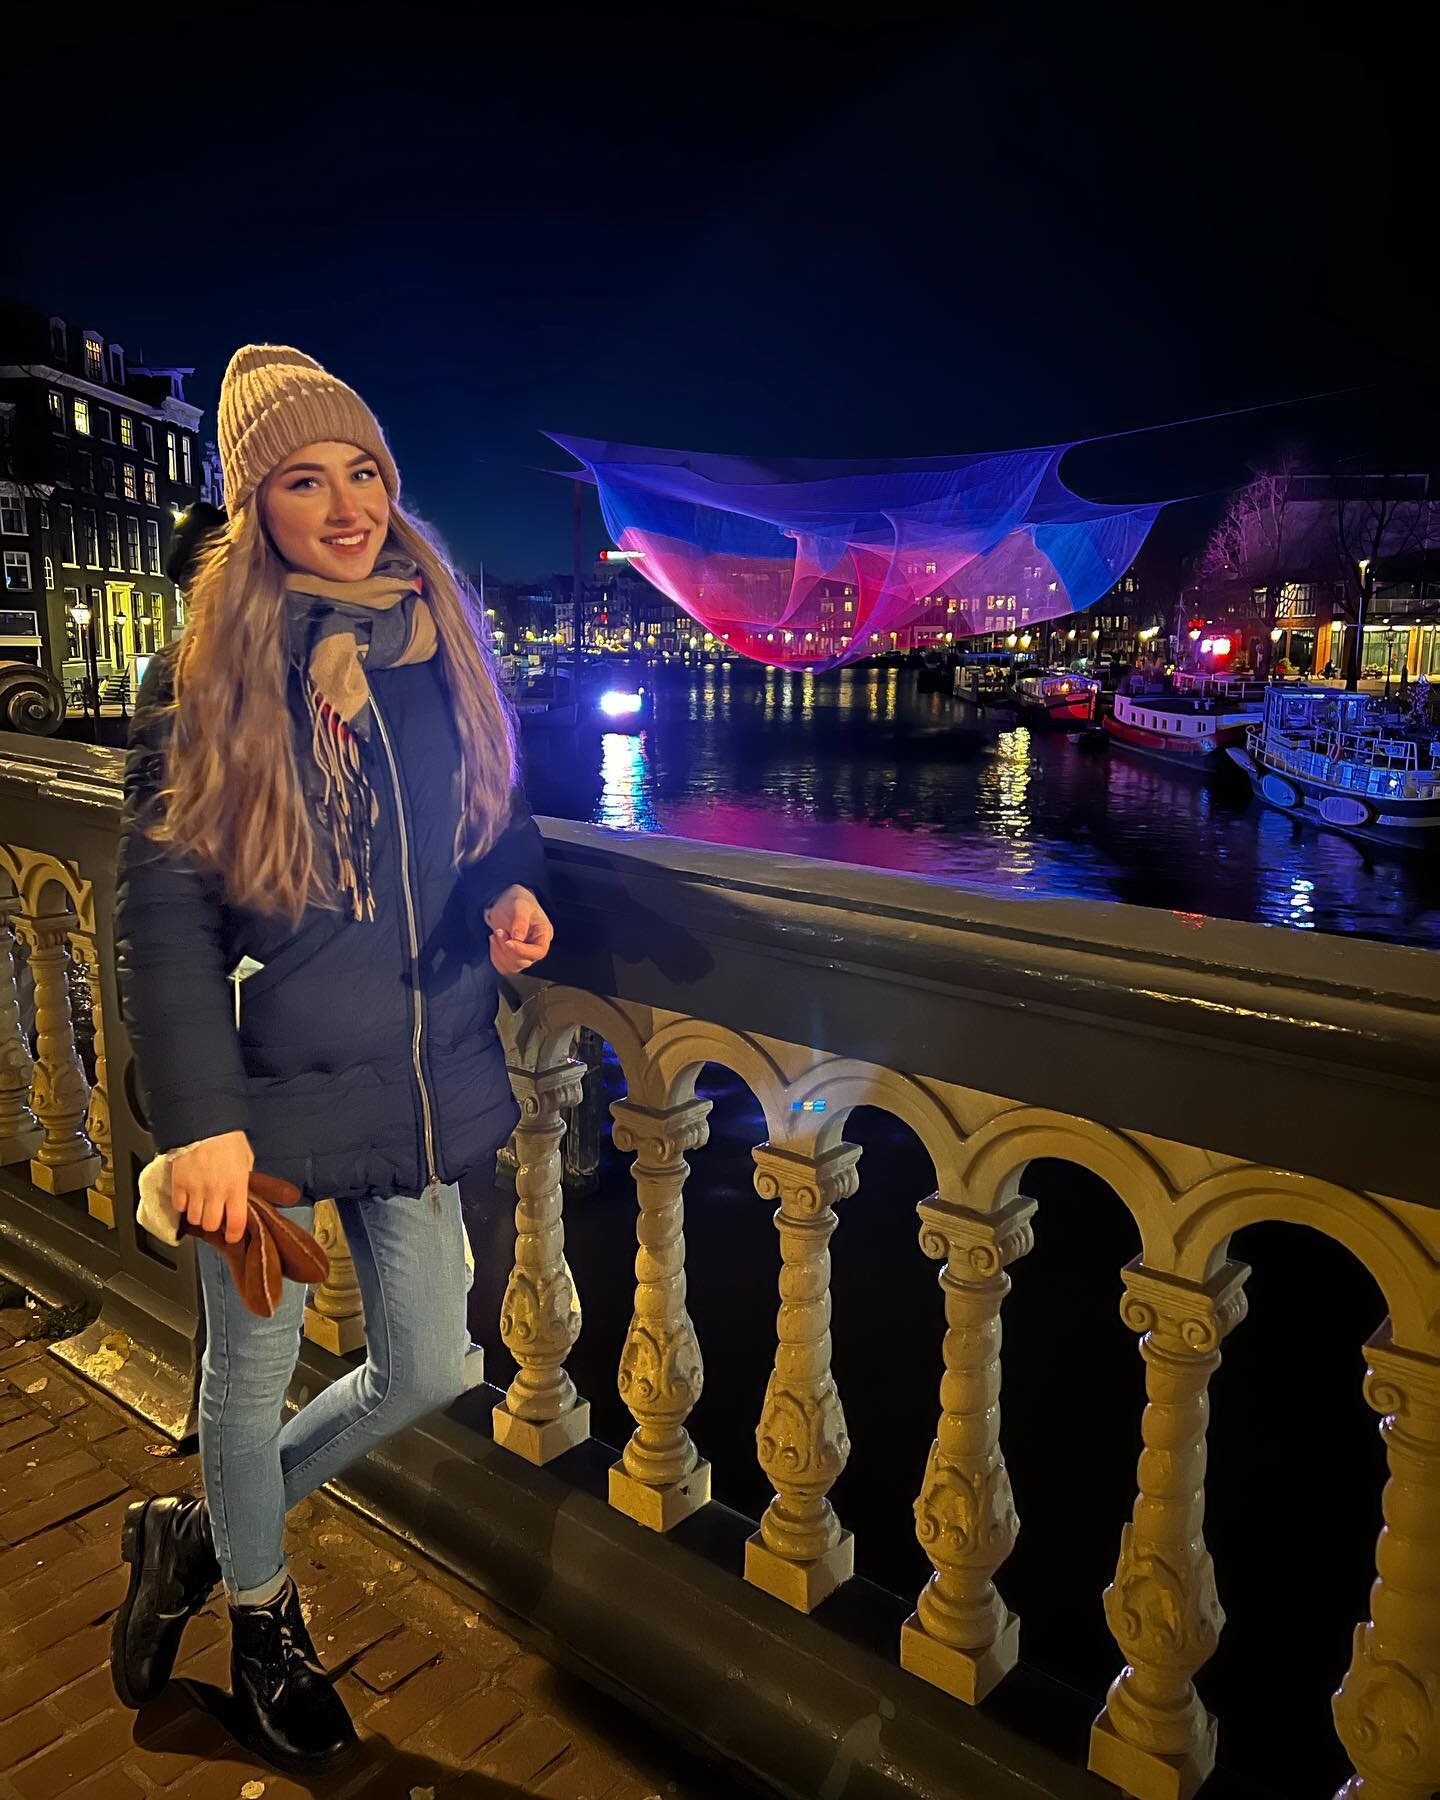 Once upon a time at @amsterdamlightfestival 😍
.
.
.
.
.
#amsterdam #netherlands #xxx #amsterdam🇳🇱 #amst #travel #trip #nl #travelphotography #travelling #winter #lightfestival